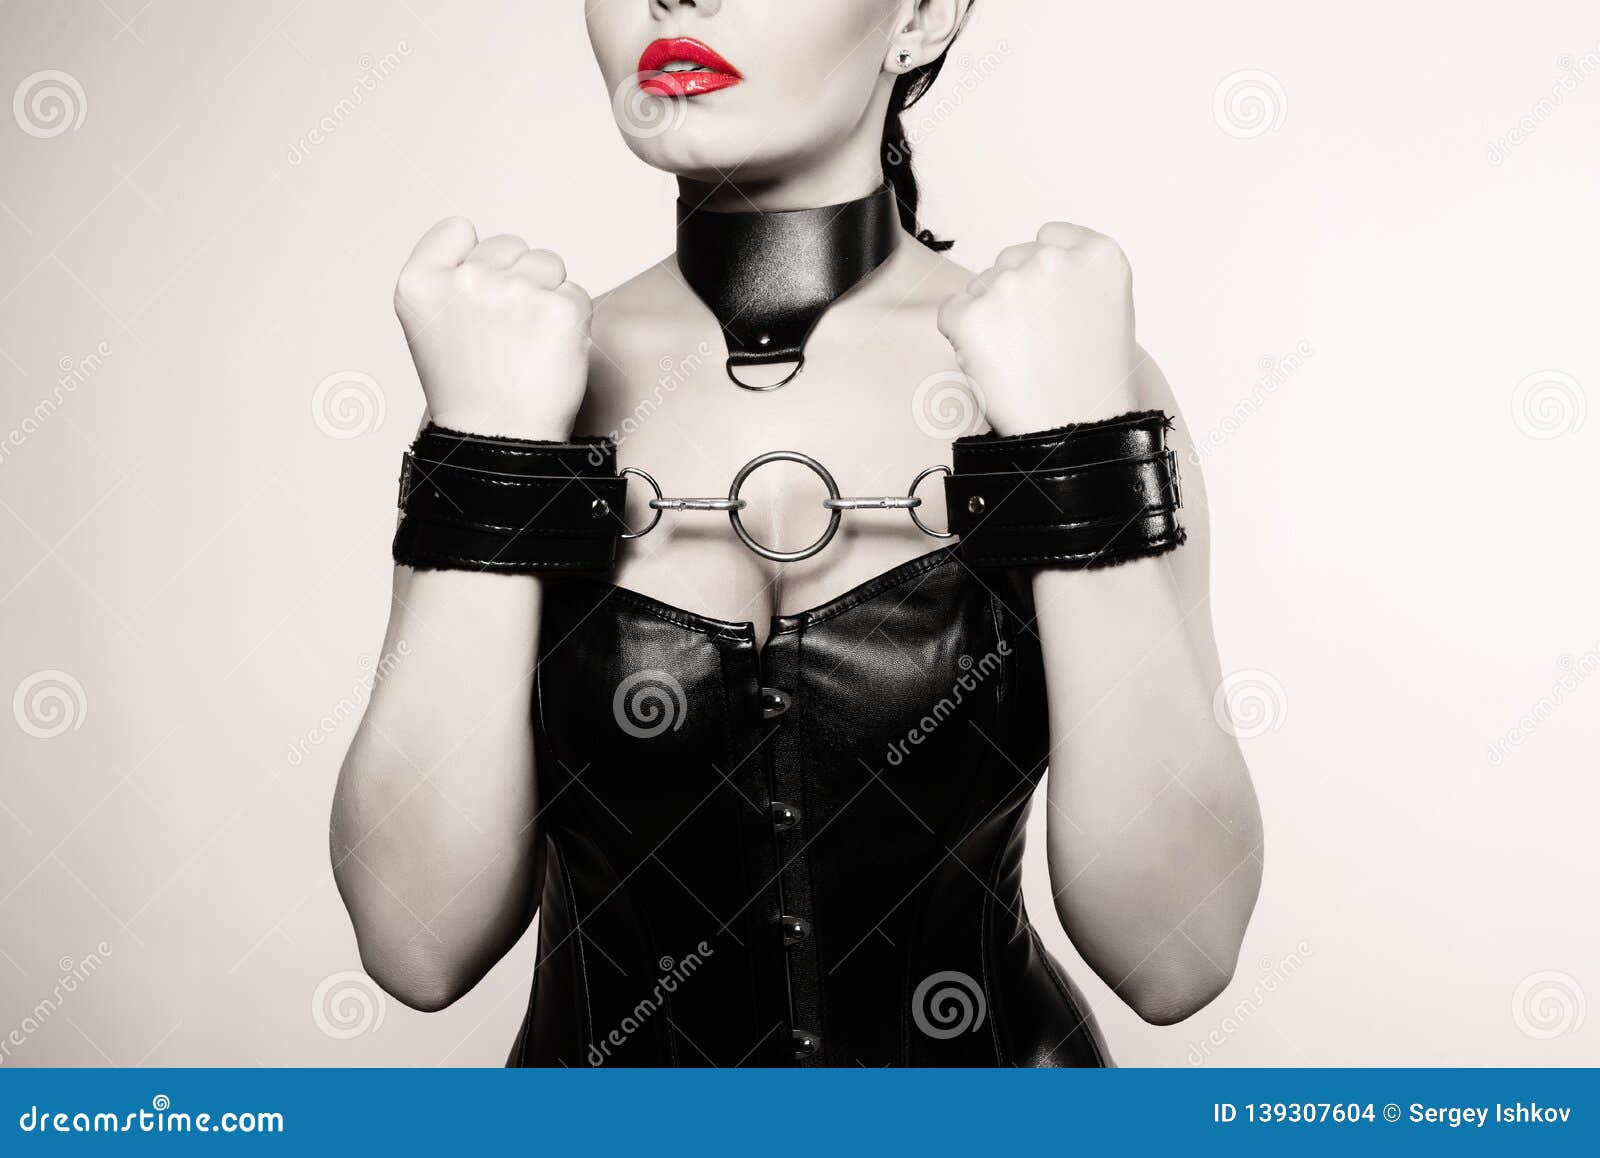 Submissive Girl In Leather Black Corset Handcuffs And Collar Waiting